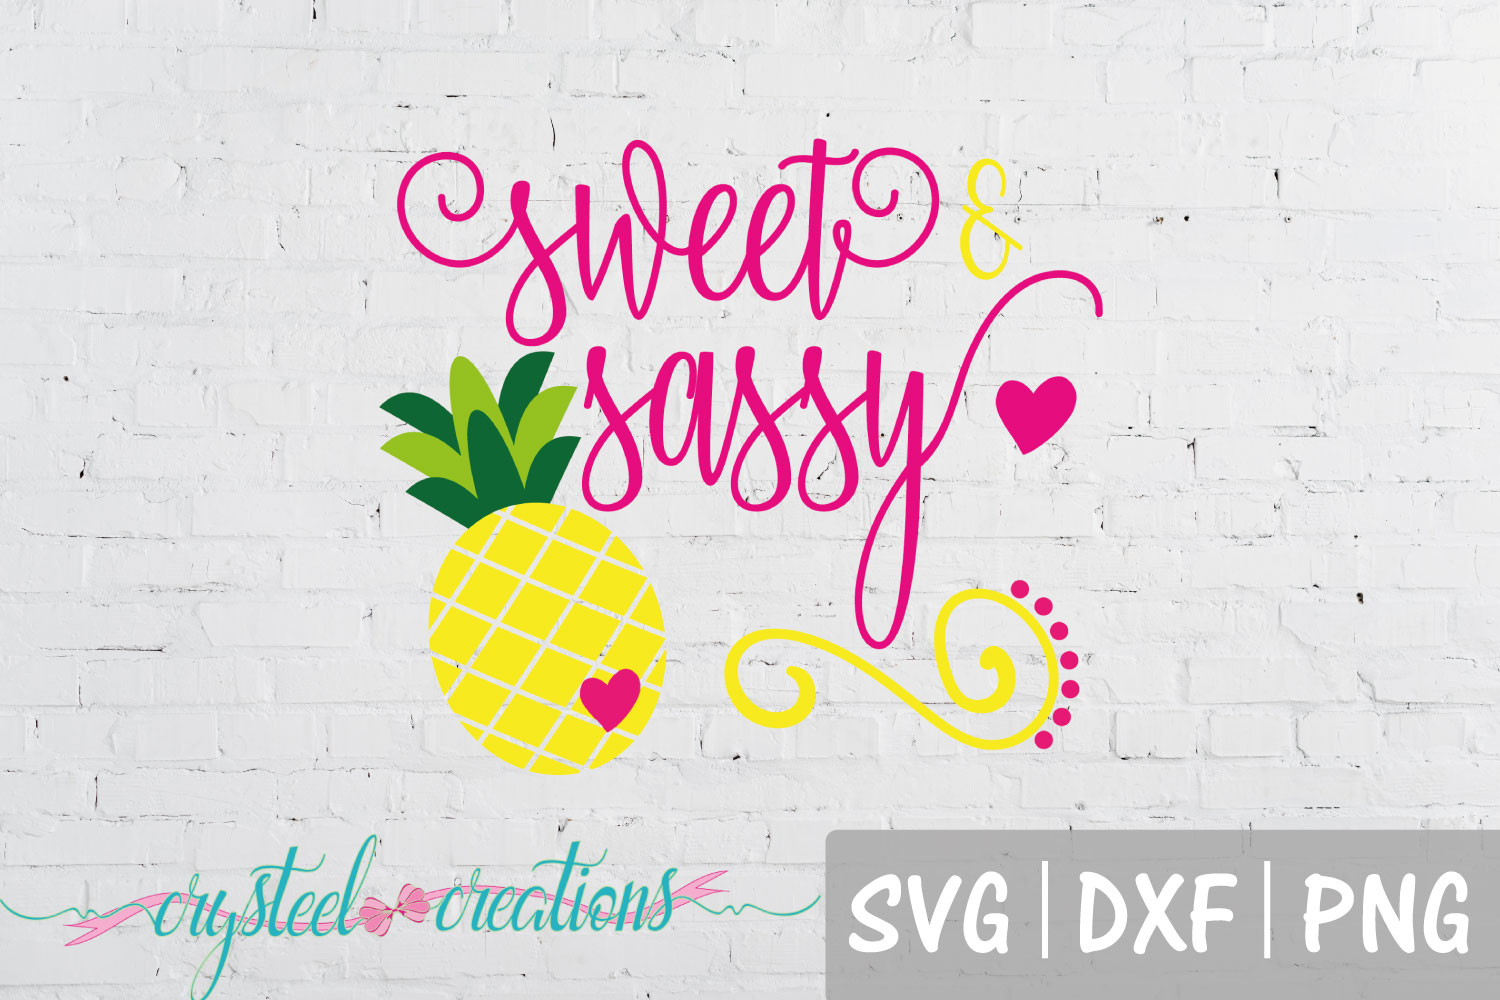 Download Sweet and Sassy SVG, DXF, PNG (101532) | Cut Files ...